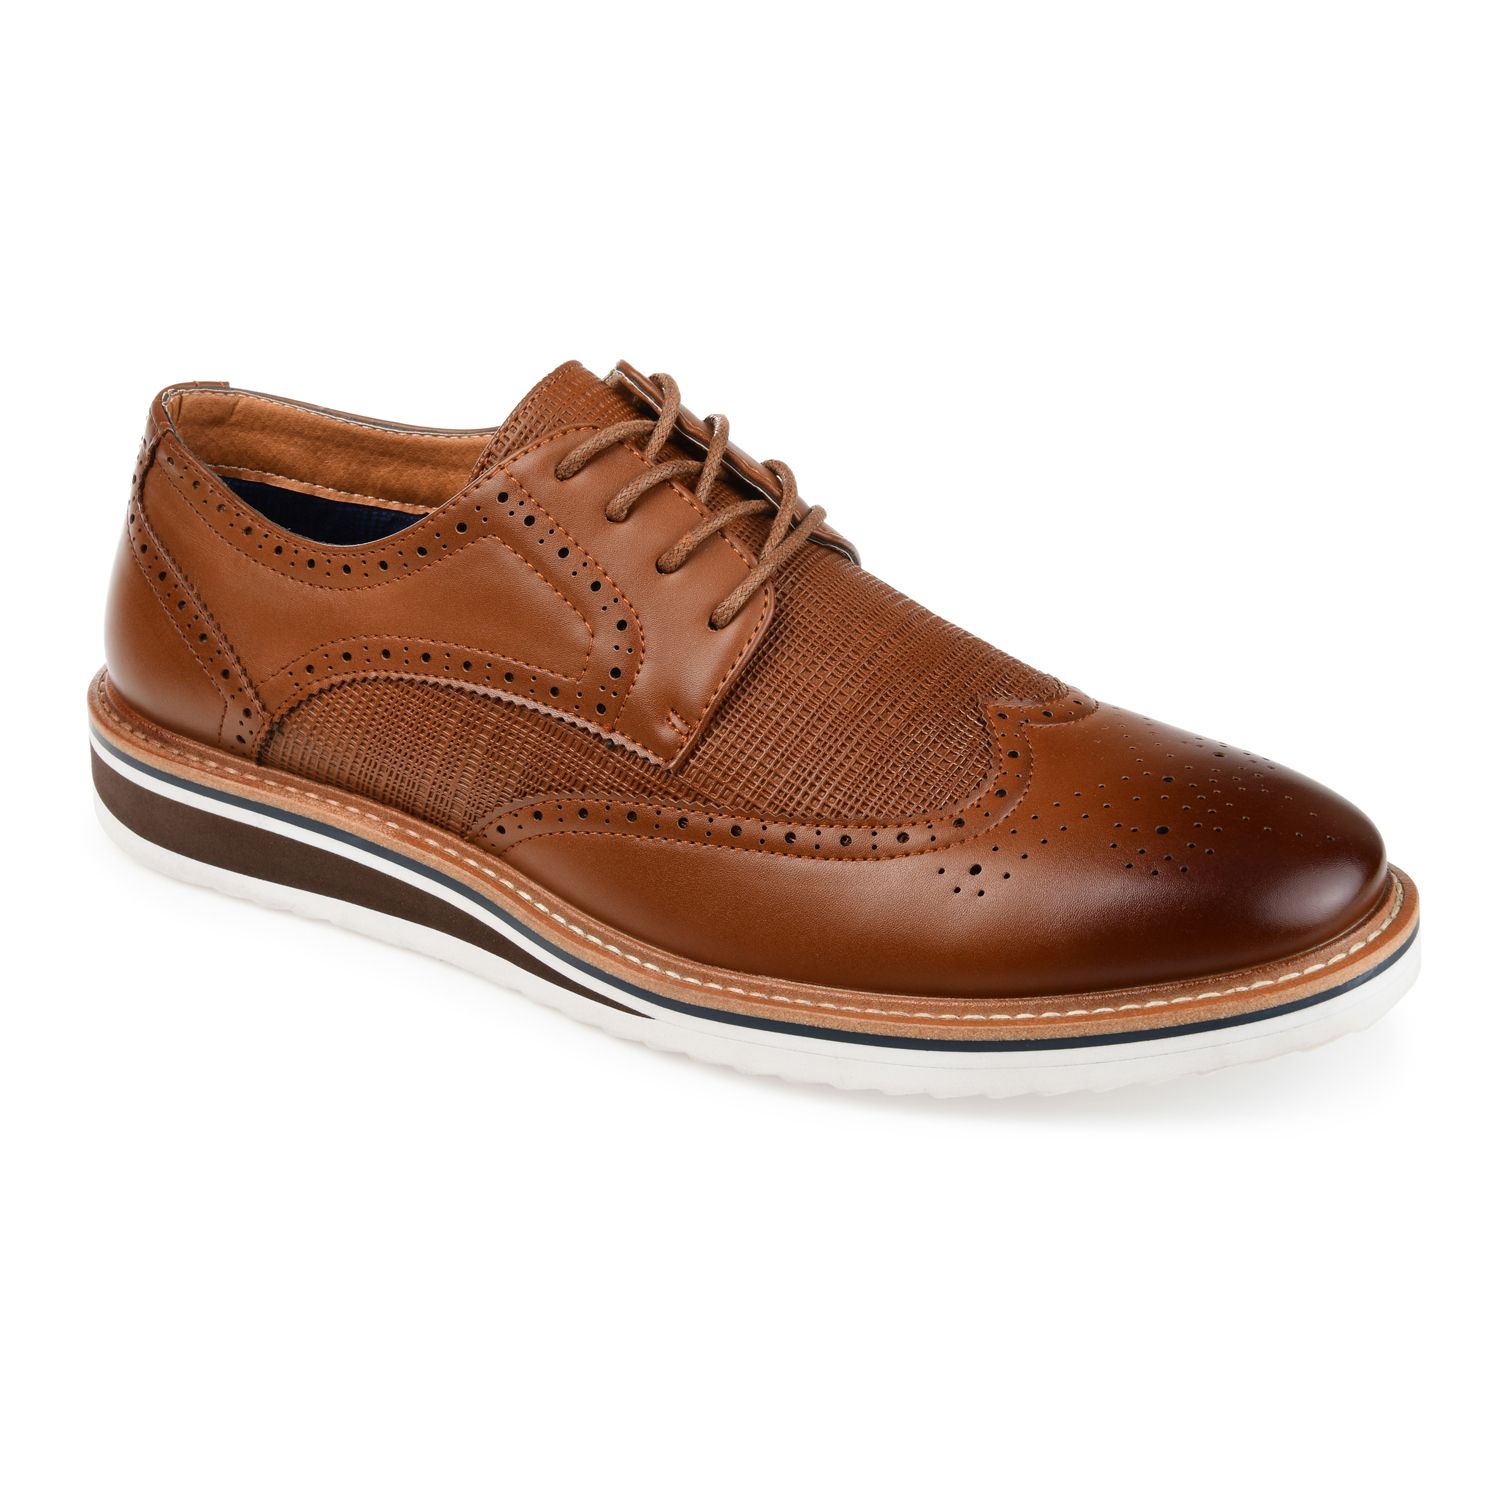 A timeless pair of oxford shoes works not only as part of the Eclectic Grandpa trend, but also as an elevated essential.